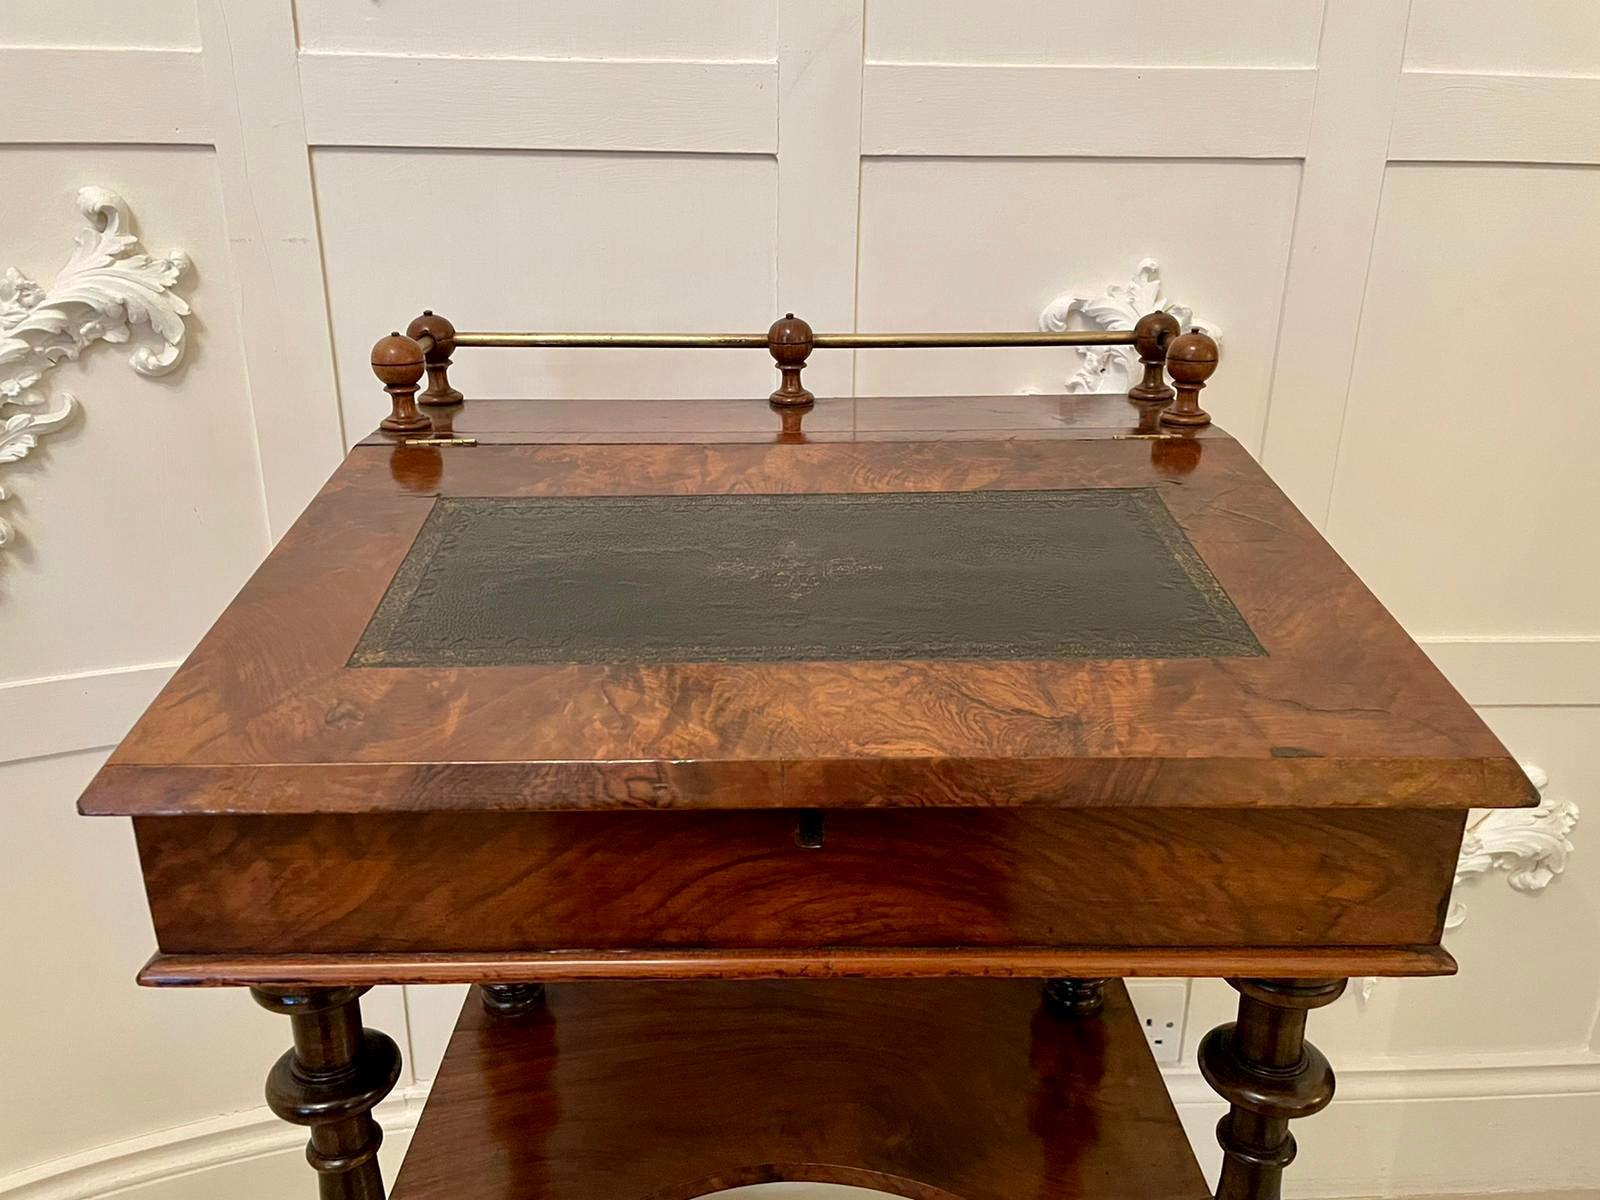 Unusual antique Victorian freestanding figured walnut ladies Davenport having the original decorative gallery above a lift up lid opening to reveal a pleasing fully fitted interior, the writing slope is crossbanded in walnut with original leather